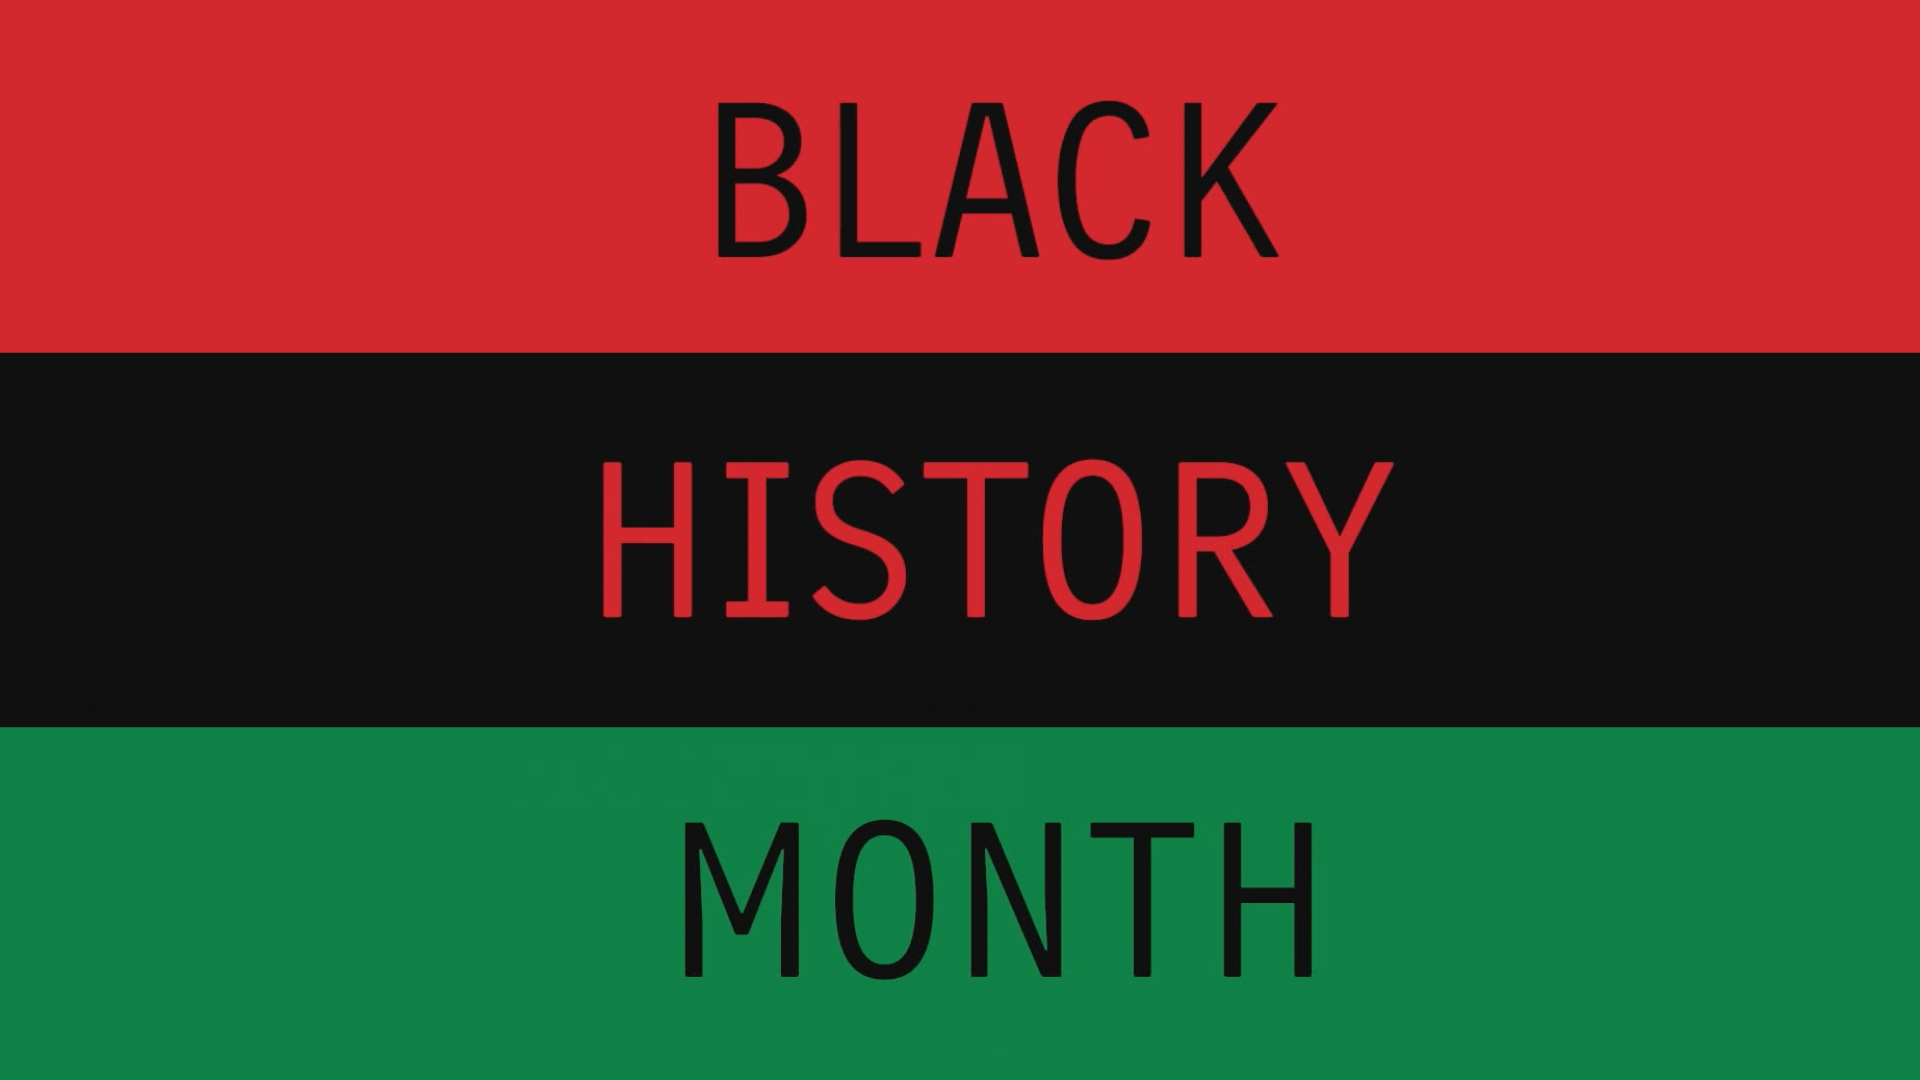 Our heart, our hope, our history: Black History Month